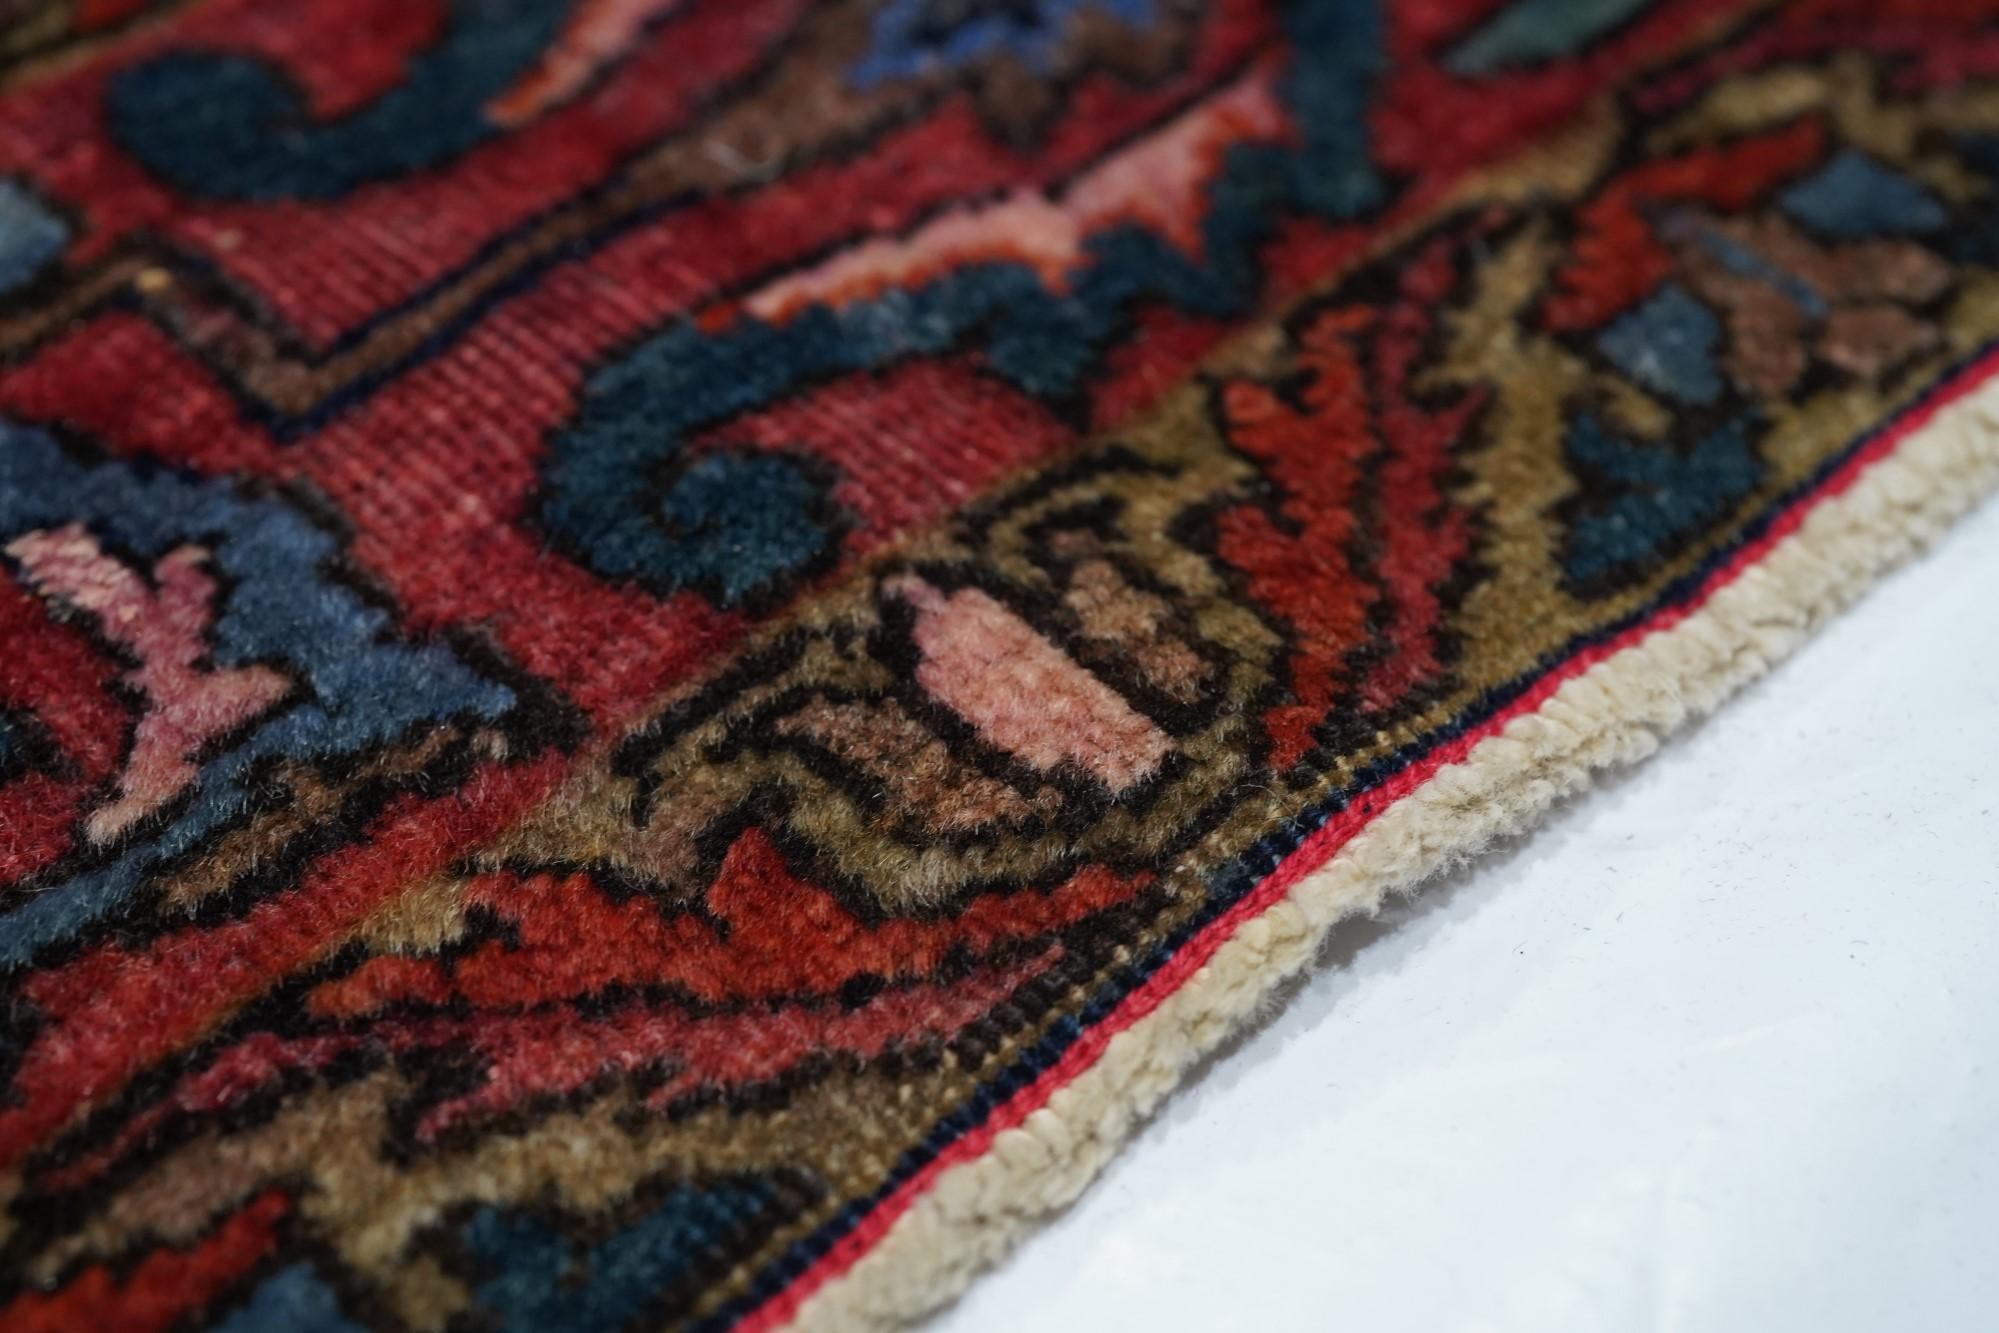 Early 20th Century Antique Mohajeran Sarouk Rug For Sale